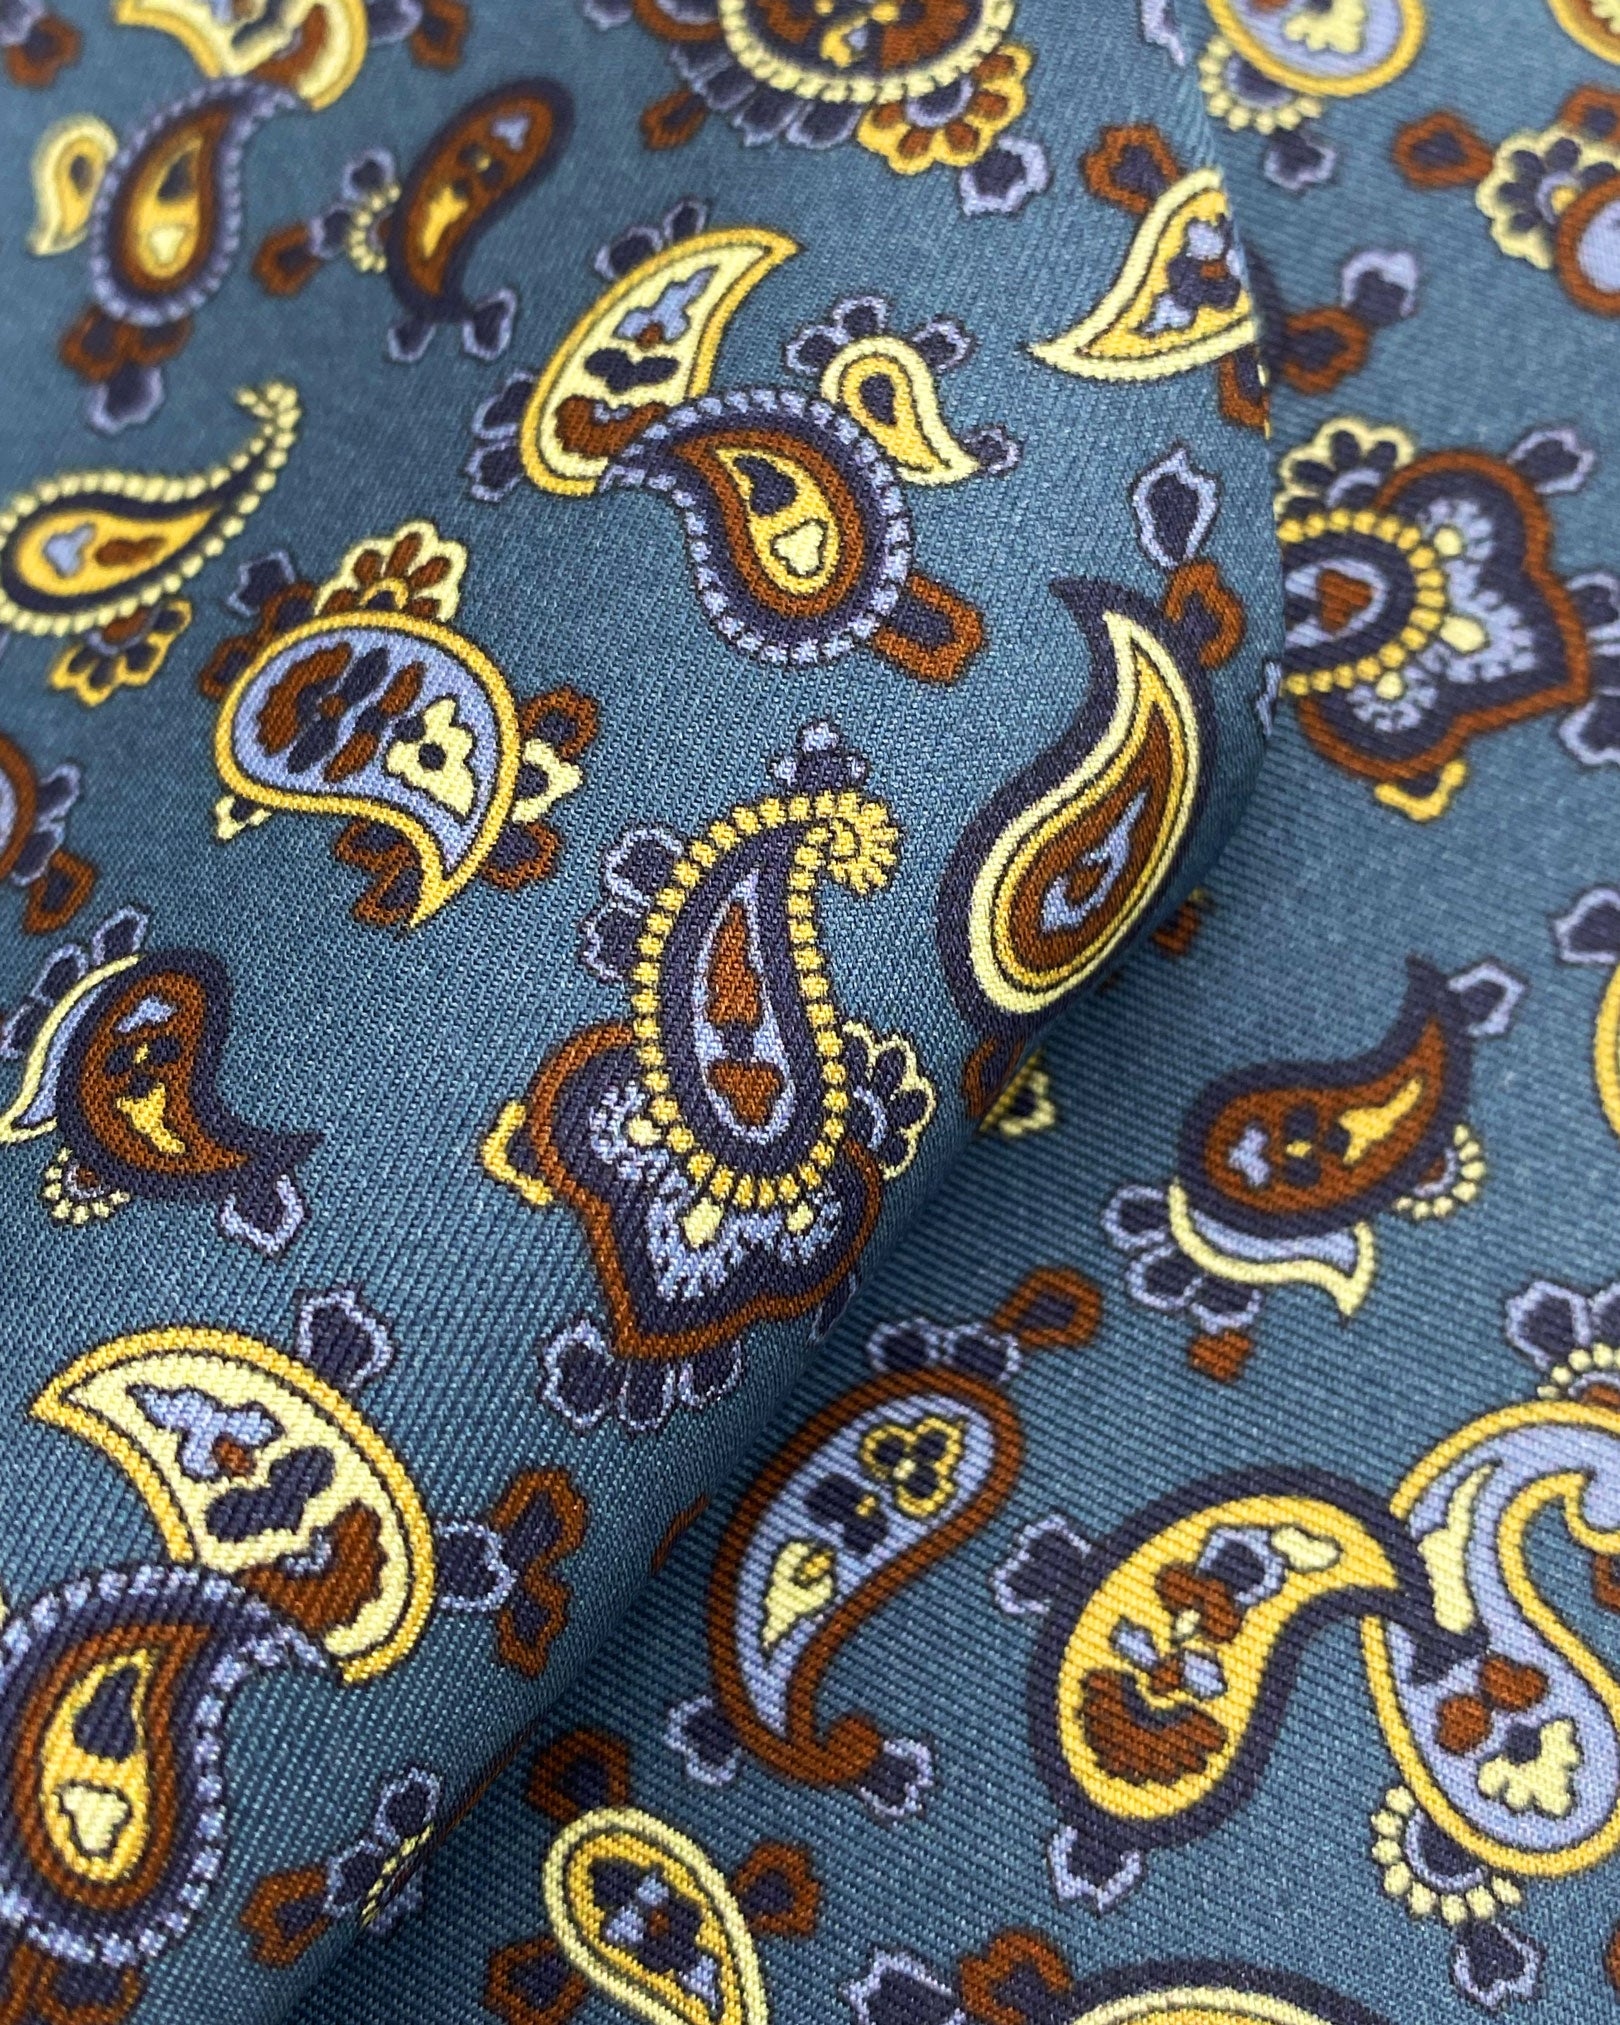 Ruffled close-up view of the Banff silk scarf, presenting a closer view of theblue, black and lemon yellow paisley patterns.